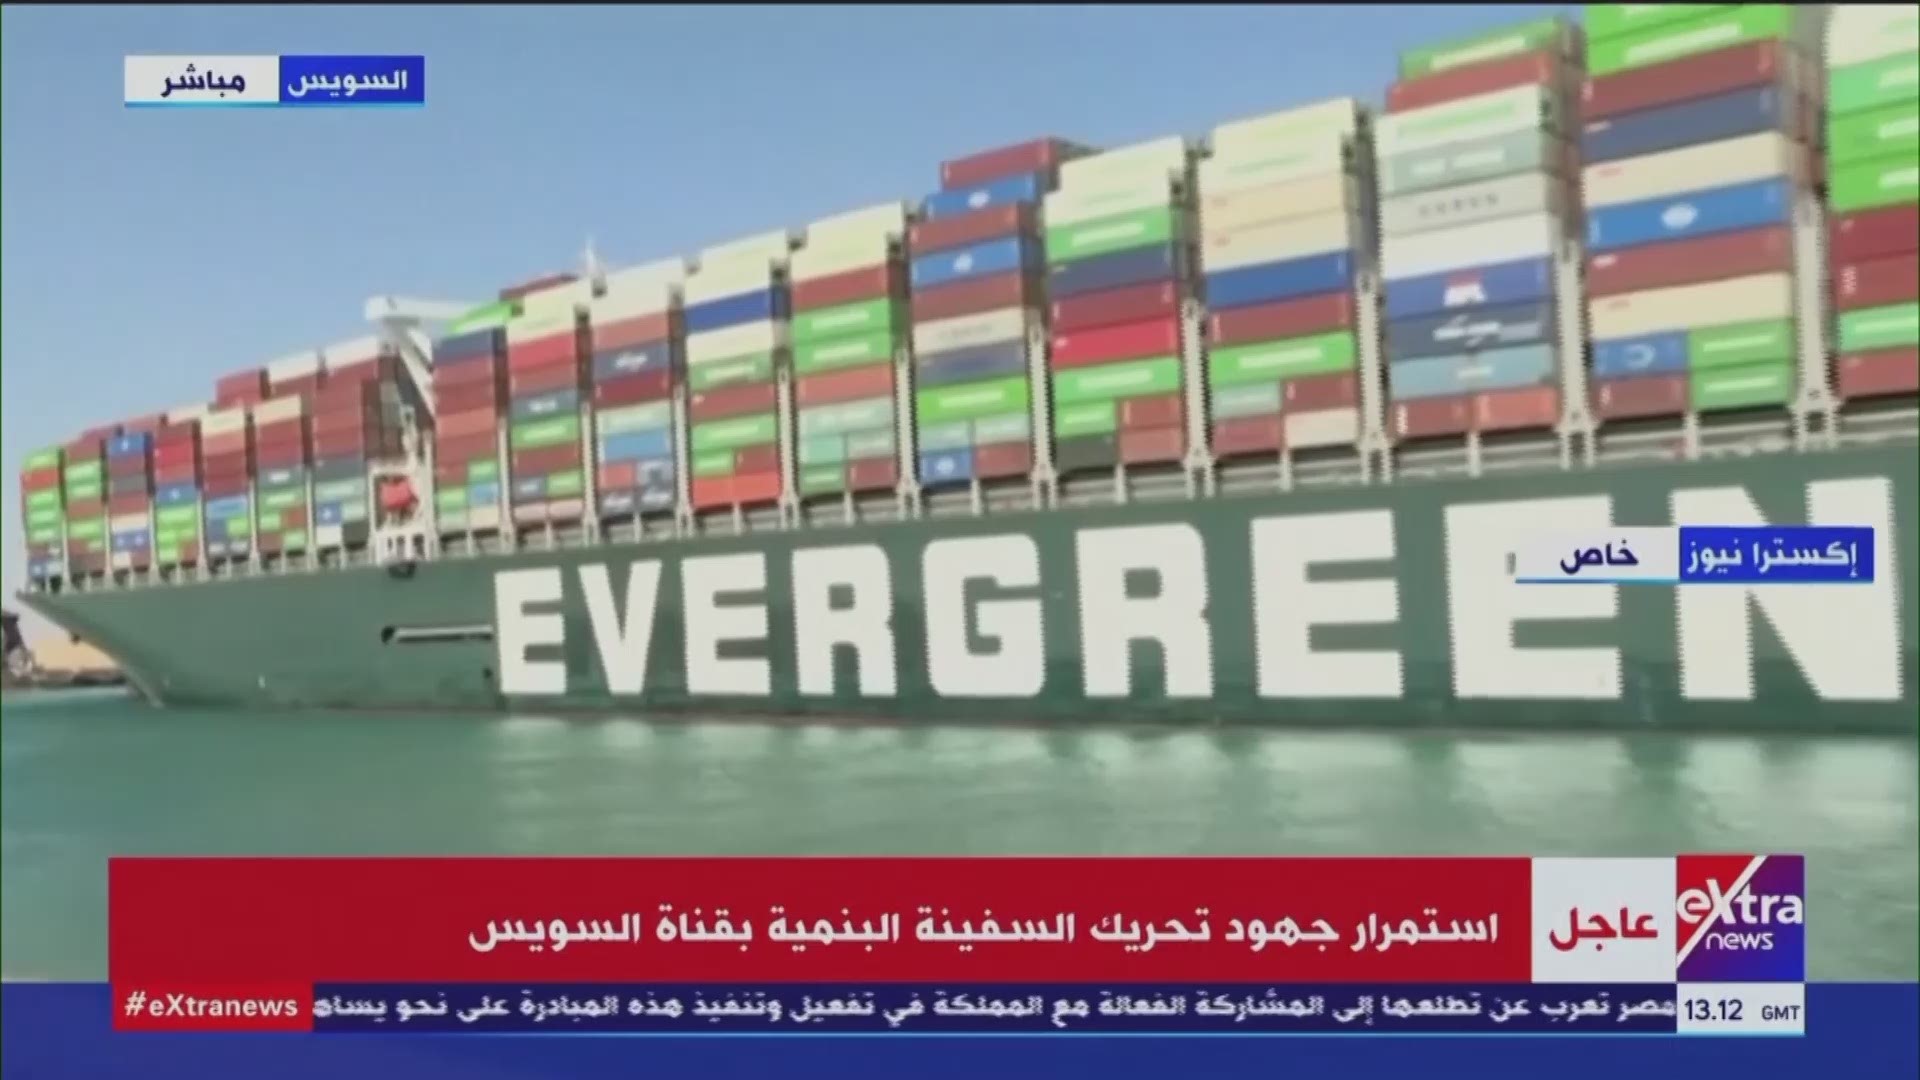 Salvage teams on Monday set free a colossal container ship that has halted global trade through the Suez Canal